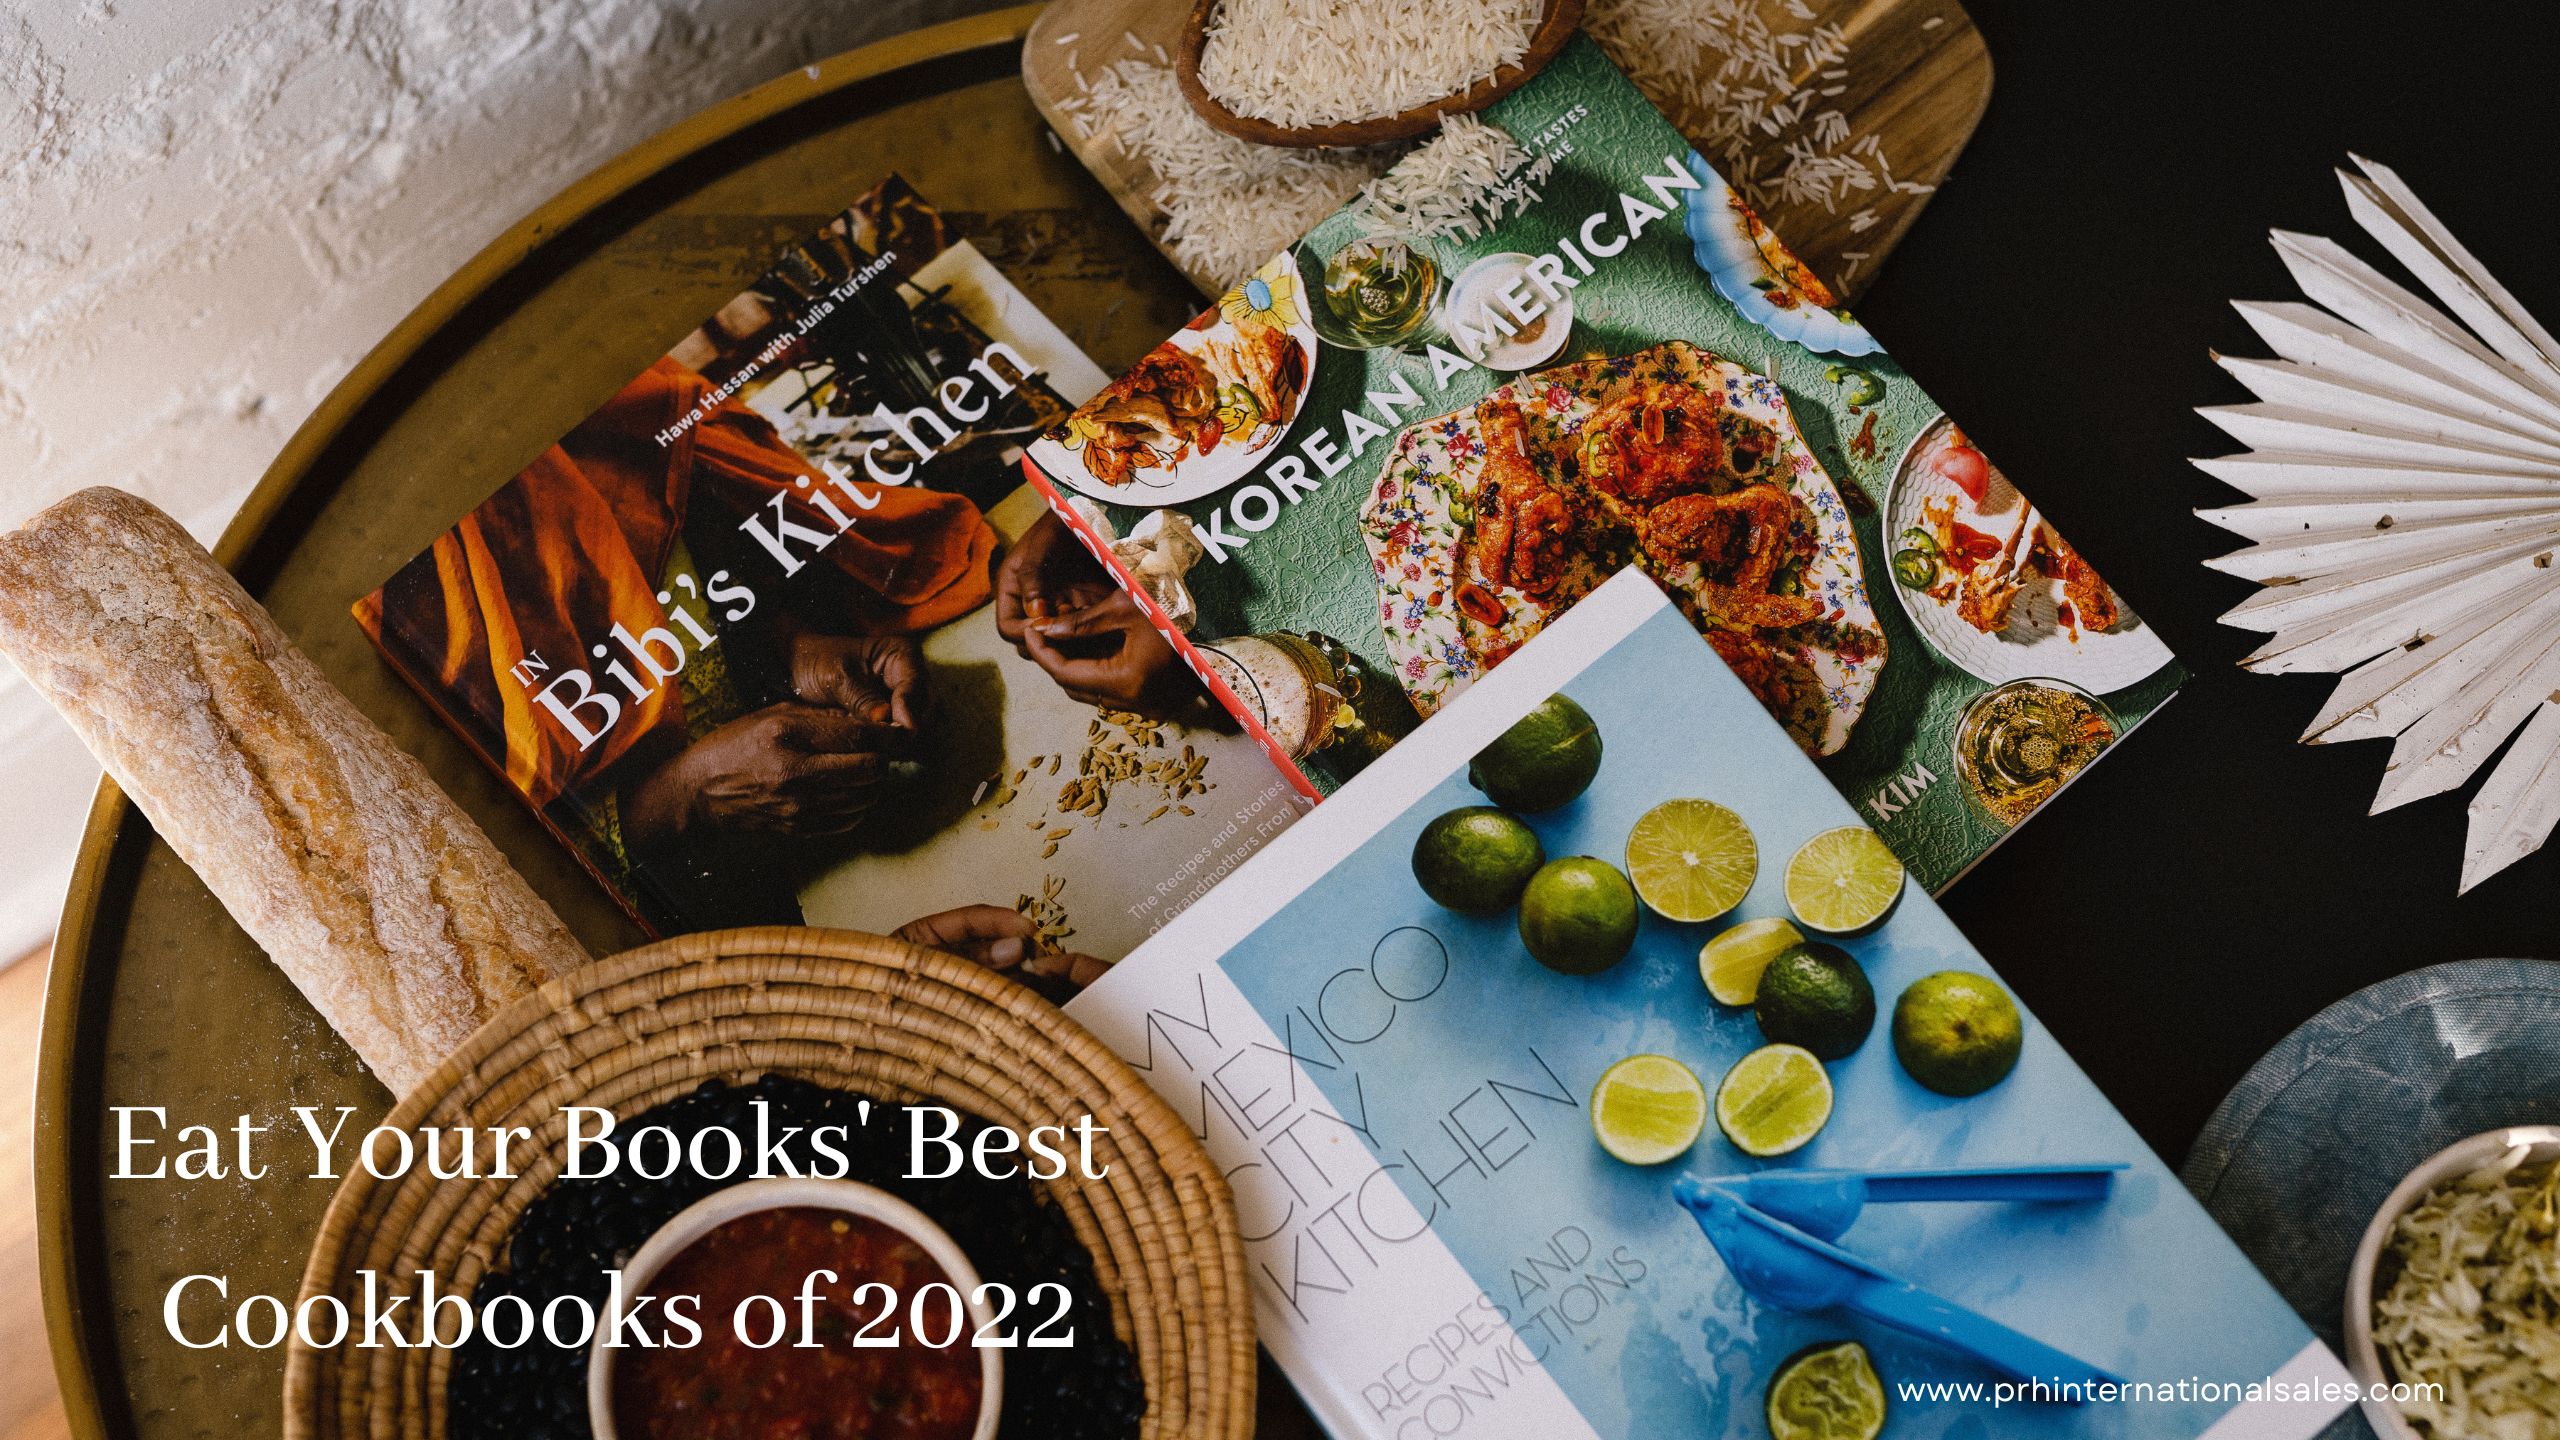 Eat Your Books Lists 13 PRH Titles as Their Best Cookbook of the Year for 2022